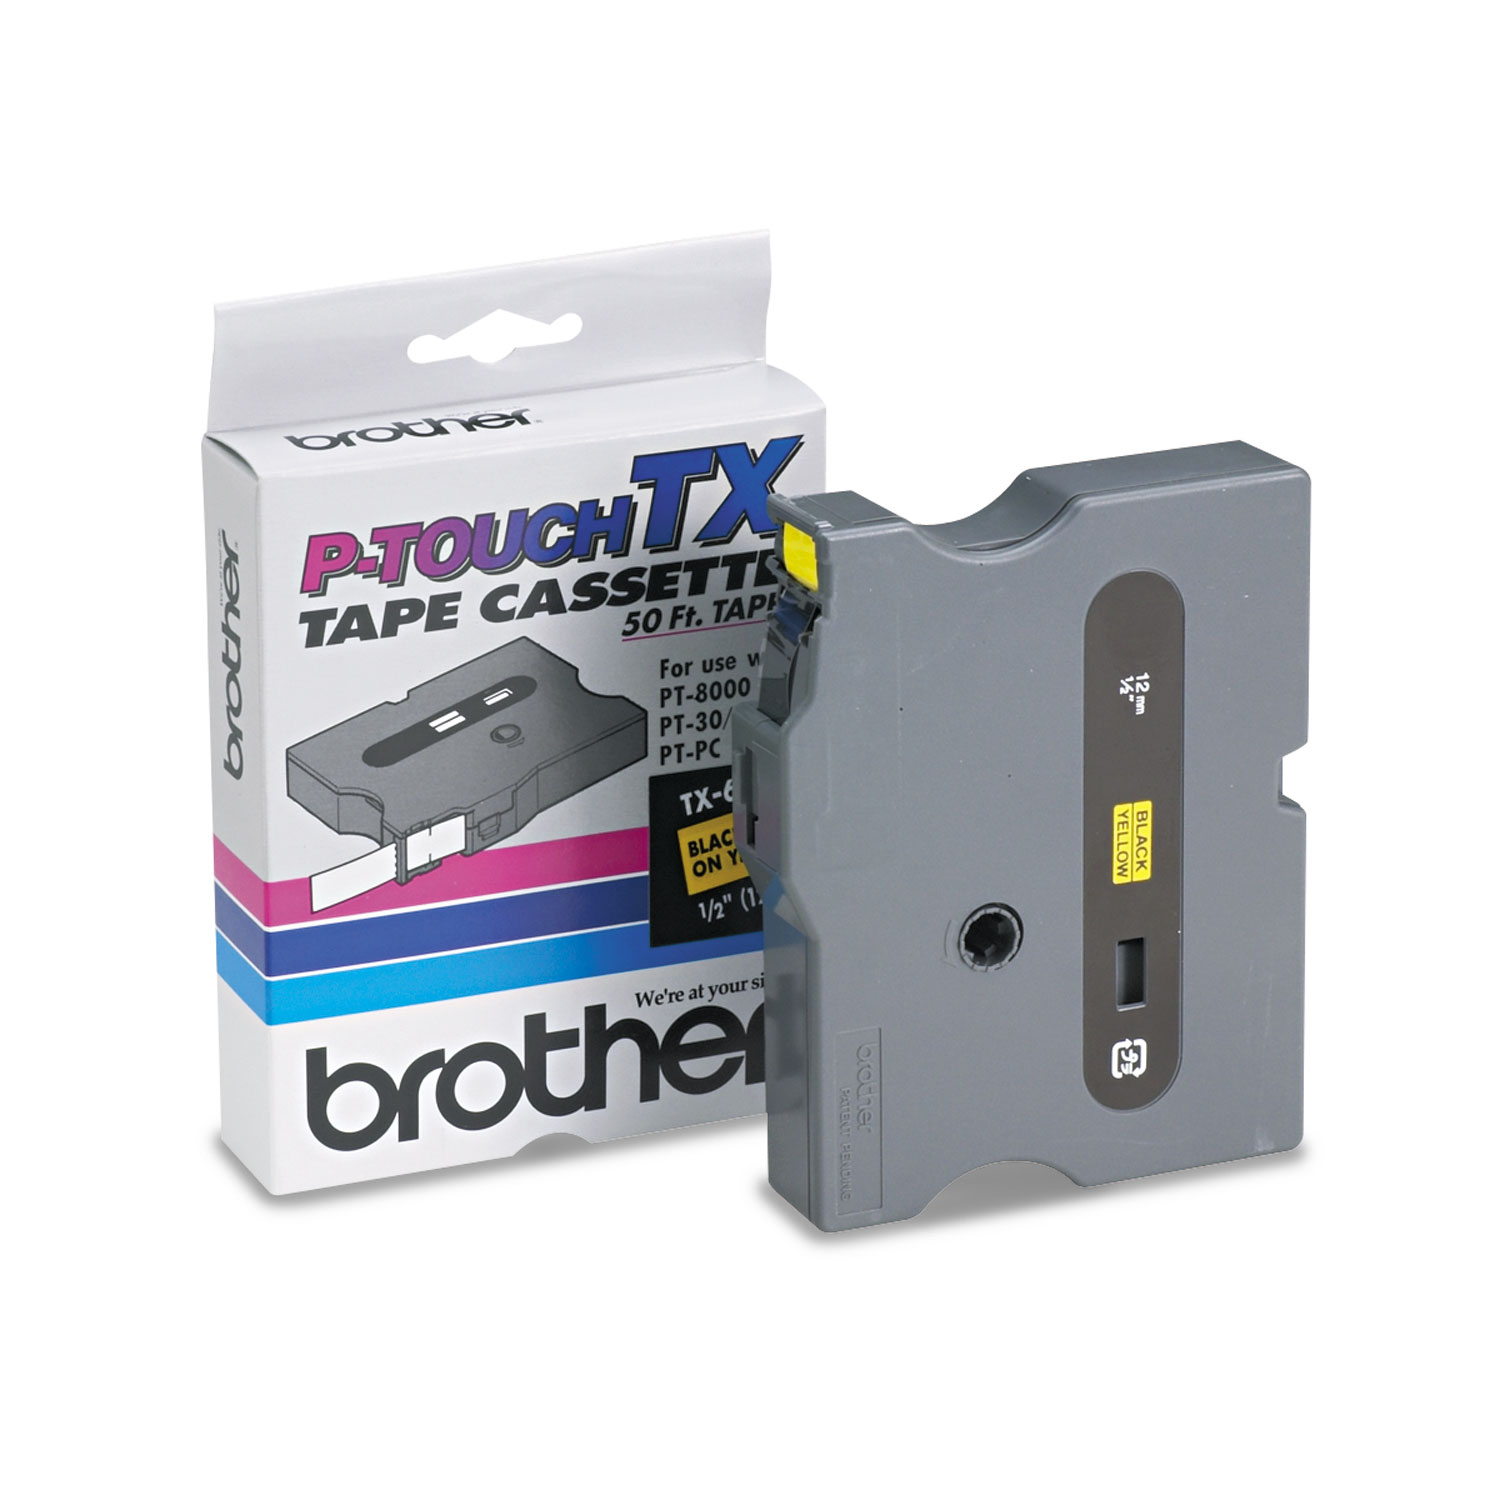  Brother P-Touch TX6311 TX Tape Cartridge for PT-8000, PT-PC, PT-30/35, 0.47 x 50 ft, Black on Yellow (BRTTX6311) 